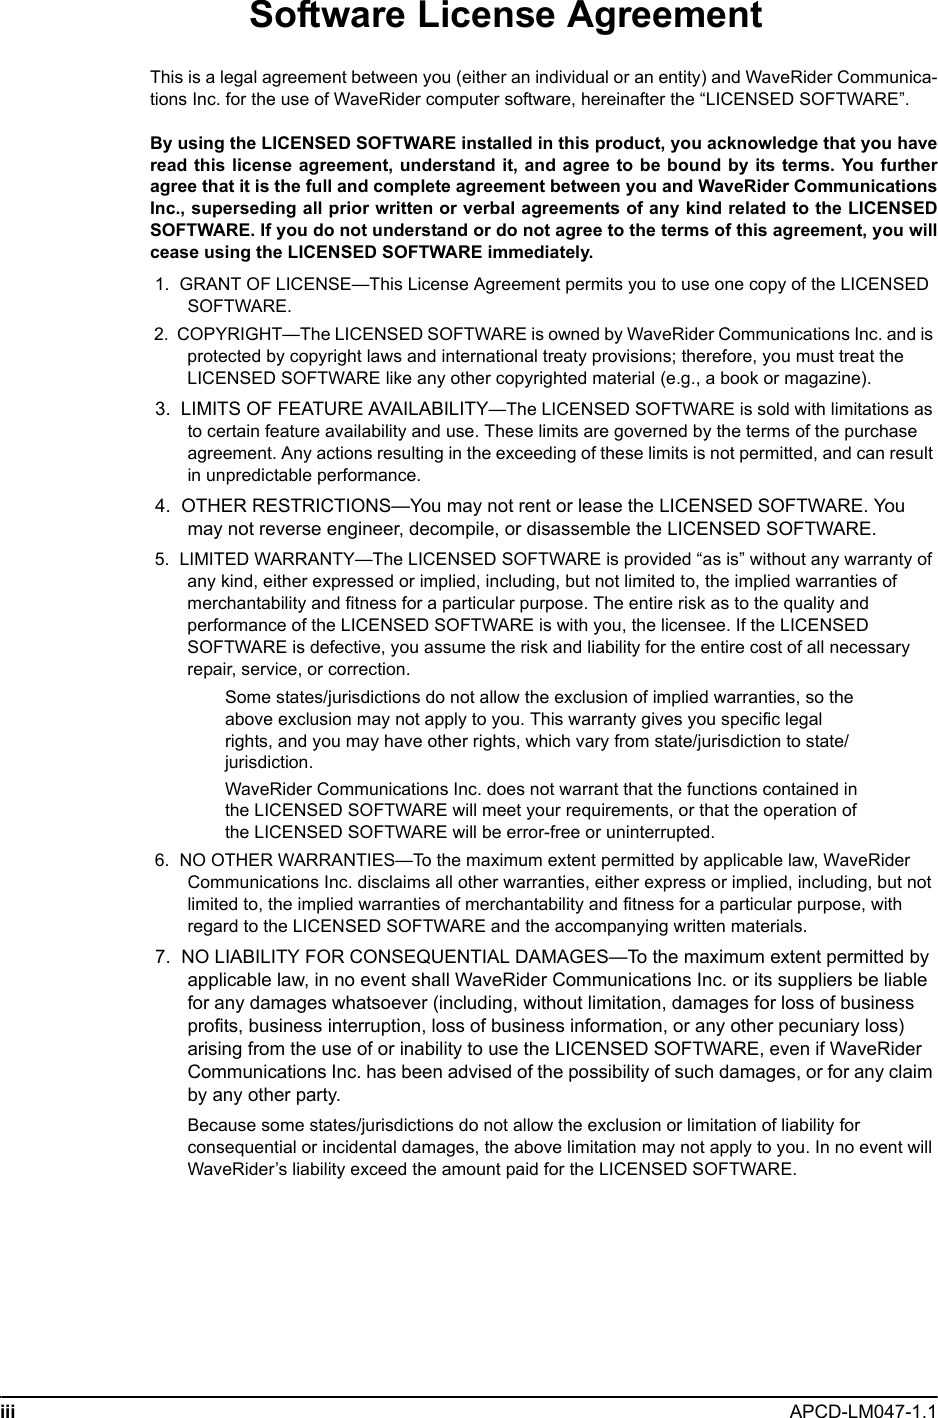 iii APCD-LM047-1.1 Software License AgreementThis is a legal agreement between you (either an individual or an entity) and WaveRider Communica-tions Inc. for the use of WaveRider computer software, hereinafter the “LICENSED SOFTWARE”.By using the LICENSED SOFTWARE installed in this product, you acknowledge that you haveread this license agreement, understand it, and agree to be bound by its terms. You furtheragree that it is the full and complete agreement between you and WaveRider CommunicationsInc., superseding all prior written or verbal agreements of any kind related to the LICENSEDSOFTWARE. If you do not understand or do not agree to the terms of this agreement, you willcease using the LICENSED SOFTWARE immediately. 1.  GRANT OF LICENSE—This License Agreement permits you to use one copy of the LICENSED SOFTWARE. 2.  COPYRIGHT—The LICENSED SOFTWARE is owned by WaveRider Communications Inc. and is protected by copyright laws and international treaty provisions; therefore, you must treat the LICENSED SOFTWARE like any other copyrighted material (e.g., a book or magazine).  3.  LIMITS OF FEATURE AVAILABILITY—The LICENSED SOFTWARE is sold with limitations as to certain feature availability and use. These limits are governed by the terms of the purchase agreement. Any actions resulting in the exceeding of these limits is not permitted, and can result in unpredictable performance. 4.  OTHER RESTRICTIONS—You may not rent or lease the LICENSED SOFTWARE. You may not reverse engineer, decompile, or disassemble the LICENSED SOFTWARE. 5.  LIMITED WARRANTY—The LICENSED SOFTWARE is provided “as is” without any warranty of any kind, either expressed or implied, including, but not limited to, the implied warranties of merchantability and fitness for a particular purpose. The entire risk as to the quality and performance of the LICENSED SOFTWARE is with you, the licensee. If the LICENSED SOFTWARE is defective, you assume the risk and liability for the entire cost of all necessary repair, service, or correction.Some states/jurisdictions do not allow the exclusion of implied warranties, so the above exclusion may not apply to you. This warranty gives you specific legal rights, and you may have other rights, which vary from state/jurisdiction to state/jurisdiction.WaveRider Communications Inc. does not warrant that the functions contained in the LICENSED SOFTWARE will meet your requirements, or that the operation of the LICENSED SOFTWARE will be error-free or uninterrupted. 6.  NO OTHER WARRANTIES—To the maximum extent permitted by applicable law, WaveRider Communications Inc. disclaims all other warranties, either express or implied, including, but not limited to, the implied warranties of merchantability and fitness for a particular purpose, with regard to the LICENSED SOFTWARE and the accompanying written materials. 7.  NO LIABILITY FOR CONSEQUENTIAL DAMAGES—To the maximum extent permitted by applicable law, in no event shall WaveRider Communications Inc. or its suppliers be liable for any damages whatsoever (including, without limitation, damages for loss of business profits, business interruption, loss of business information, or any other pecuniary loss) arising from the use of or inability to use the LICENSED SOFTWARE, even if WaveRider Communications Inc. has been advised of the possibility of such damages, or for any claim by any other party.Because some states/jurisdictions do not allow the exclusion or limitation of liability for consequential or incidental damages, the above limitation may not apply to you. In no event will WaveRider’s liability exceed the amount paid for the LICENSED SOFTWARE.